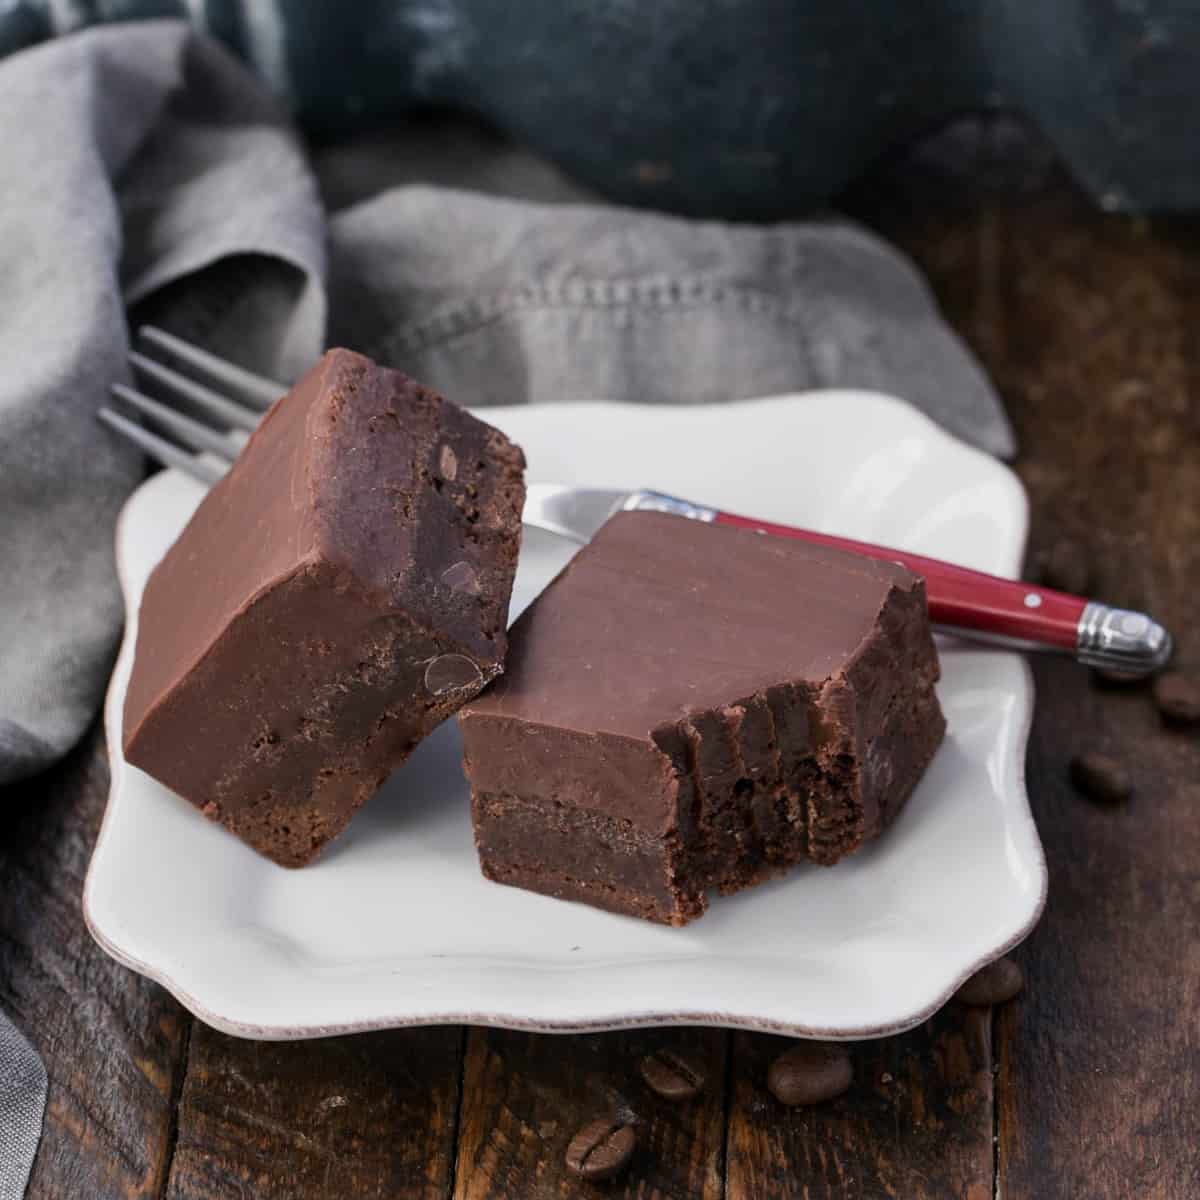 Fudge topped kahlua brownies on a square white plate with a red handled fork.